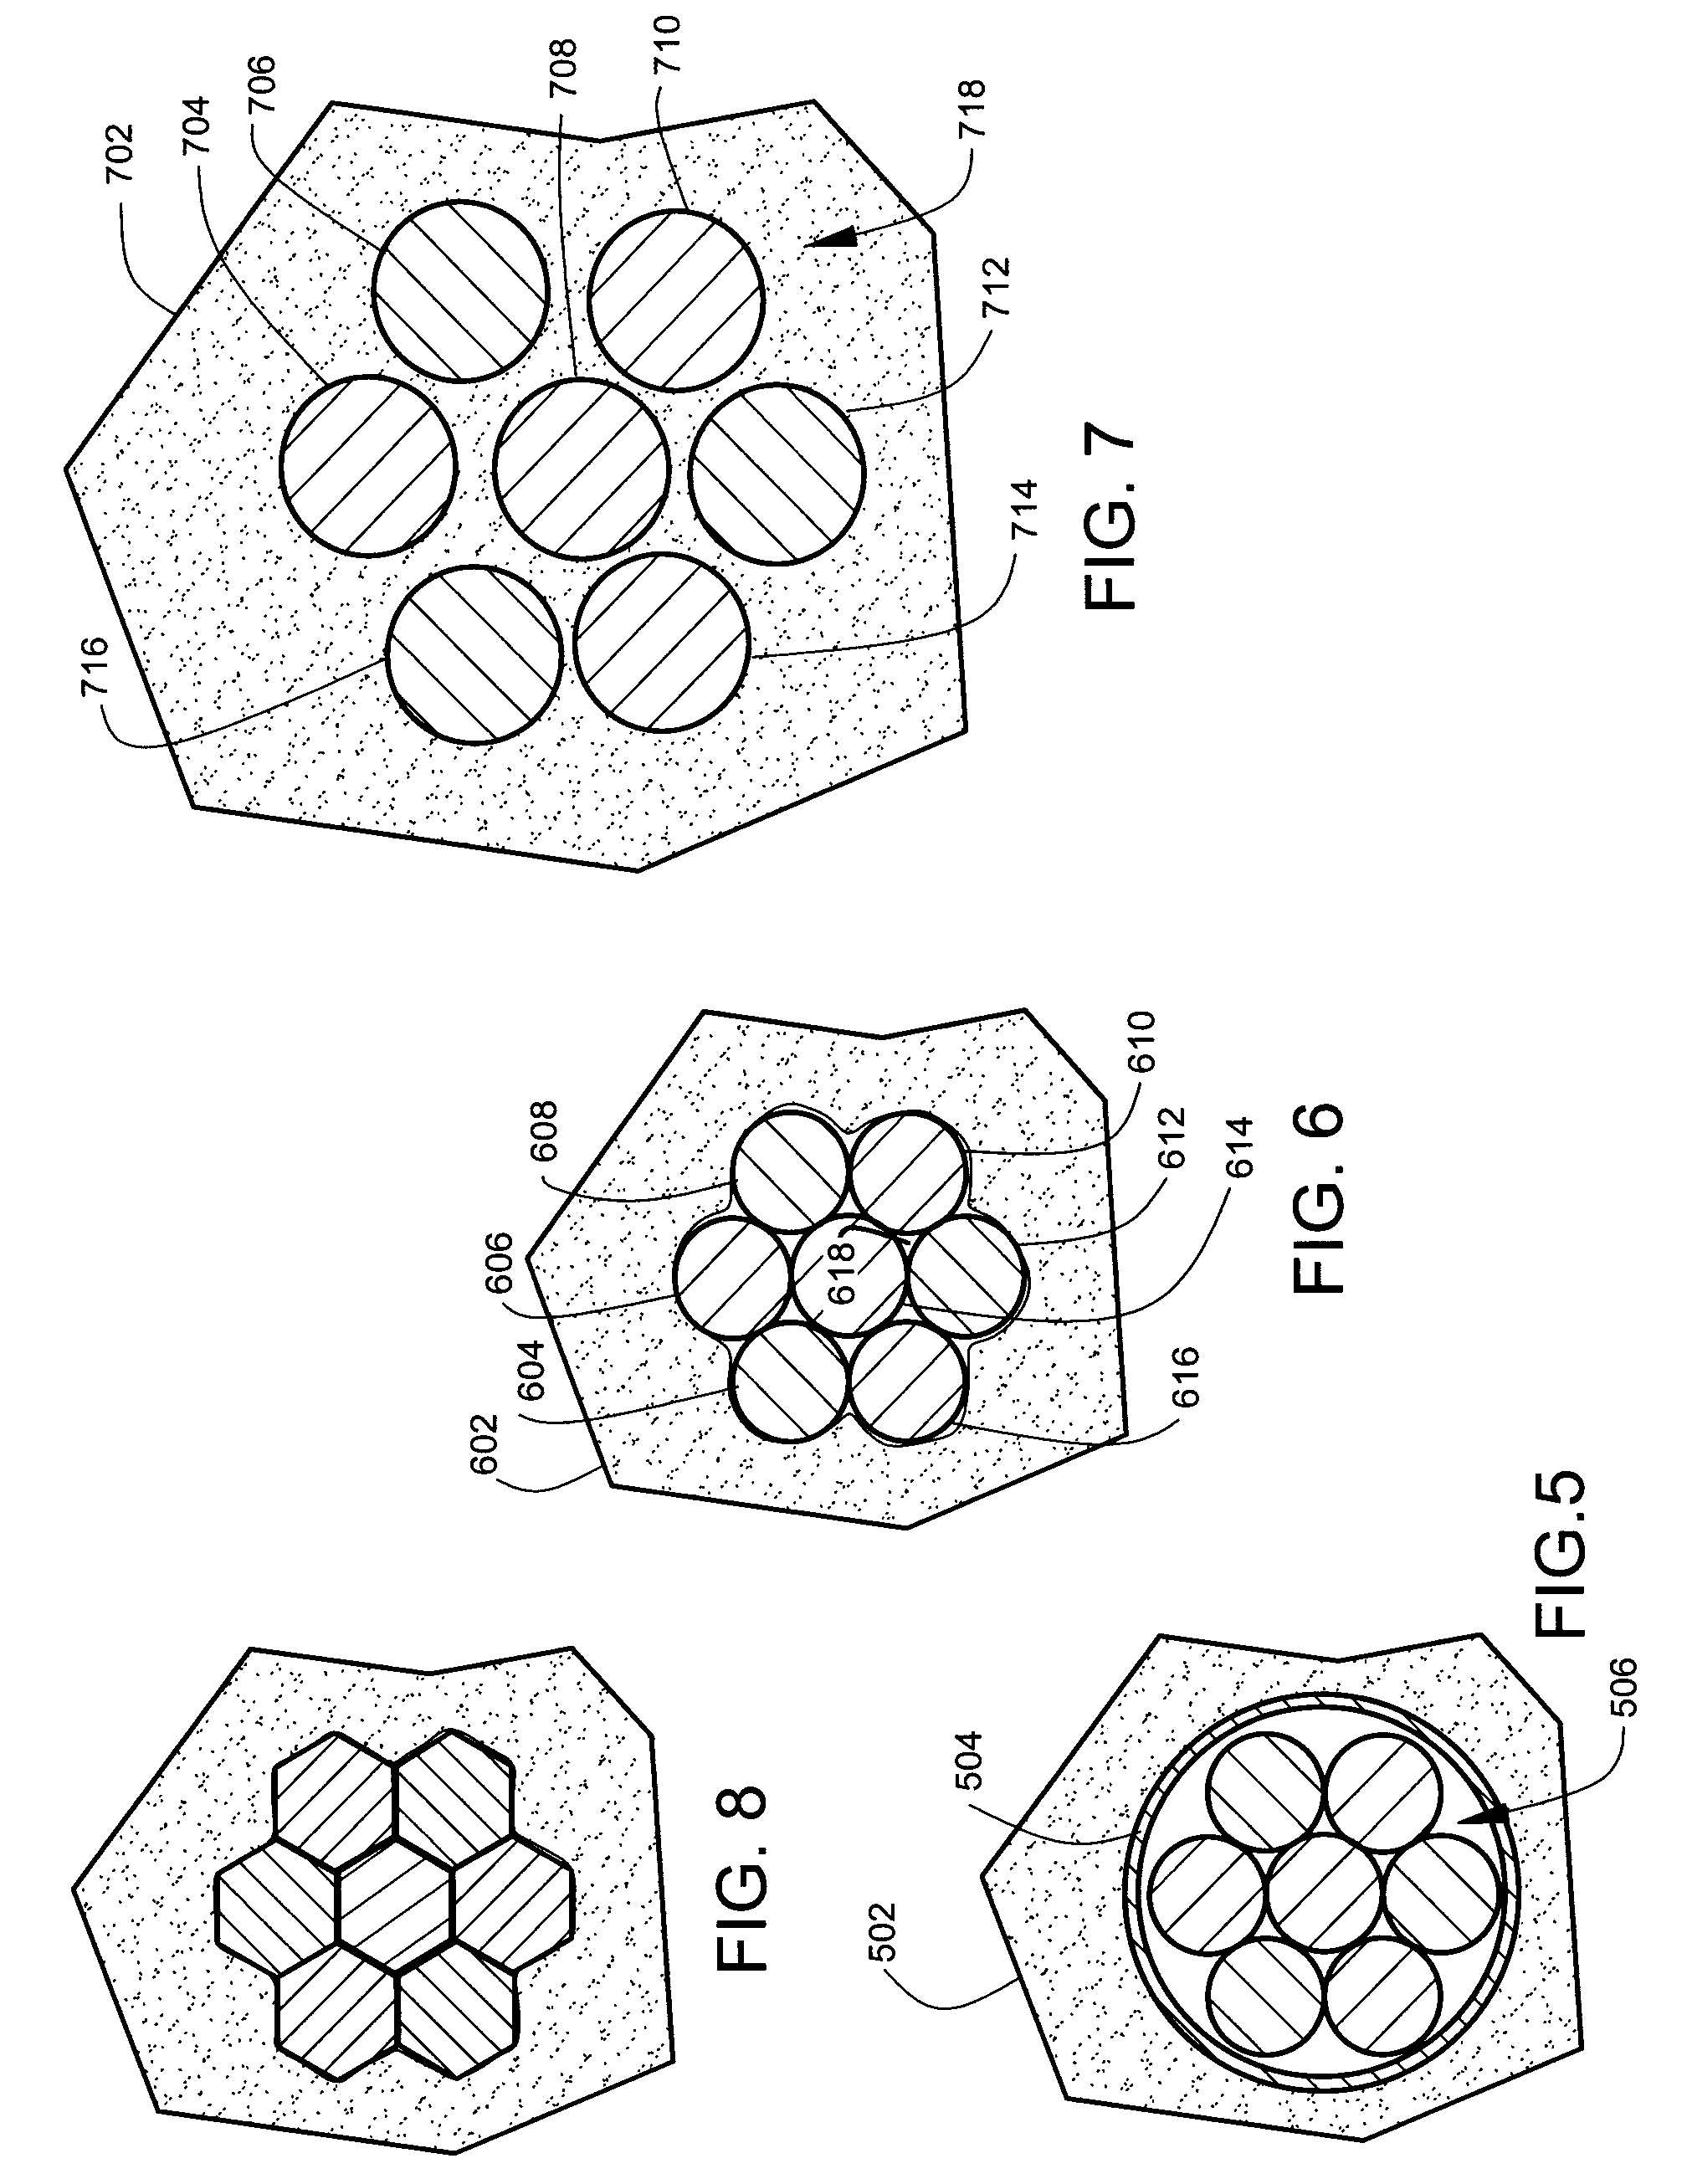 Malleable Prosthesis with Enhanced Concealability